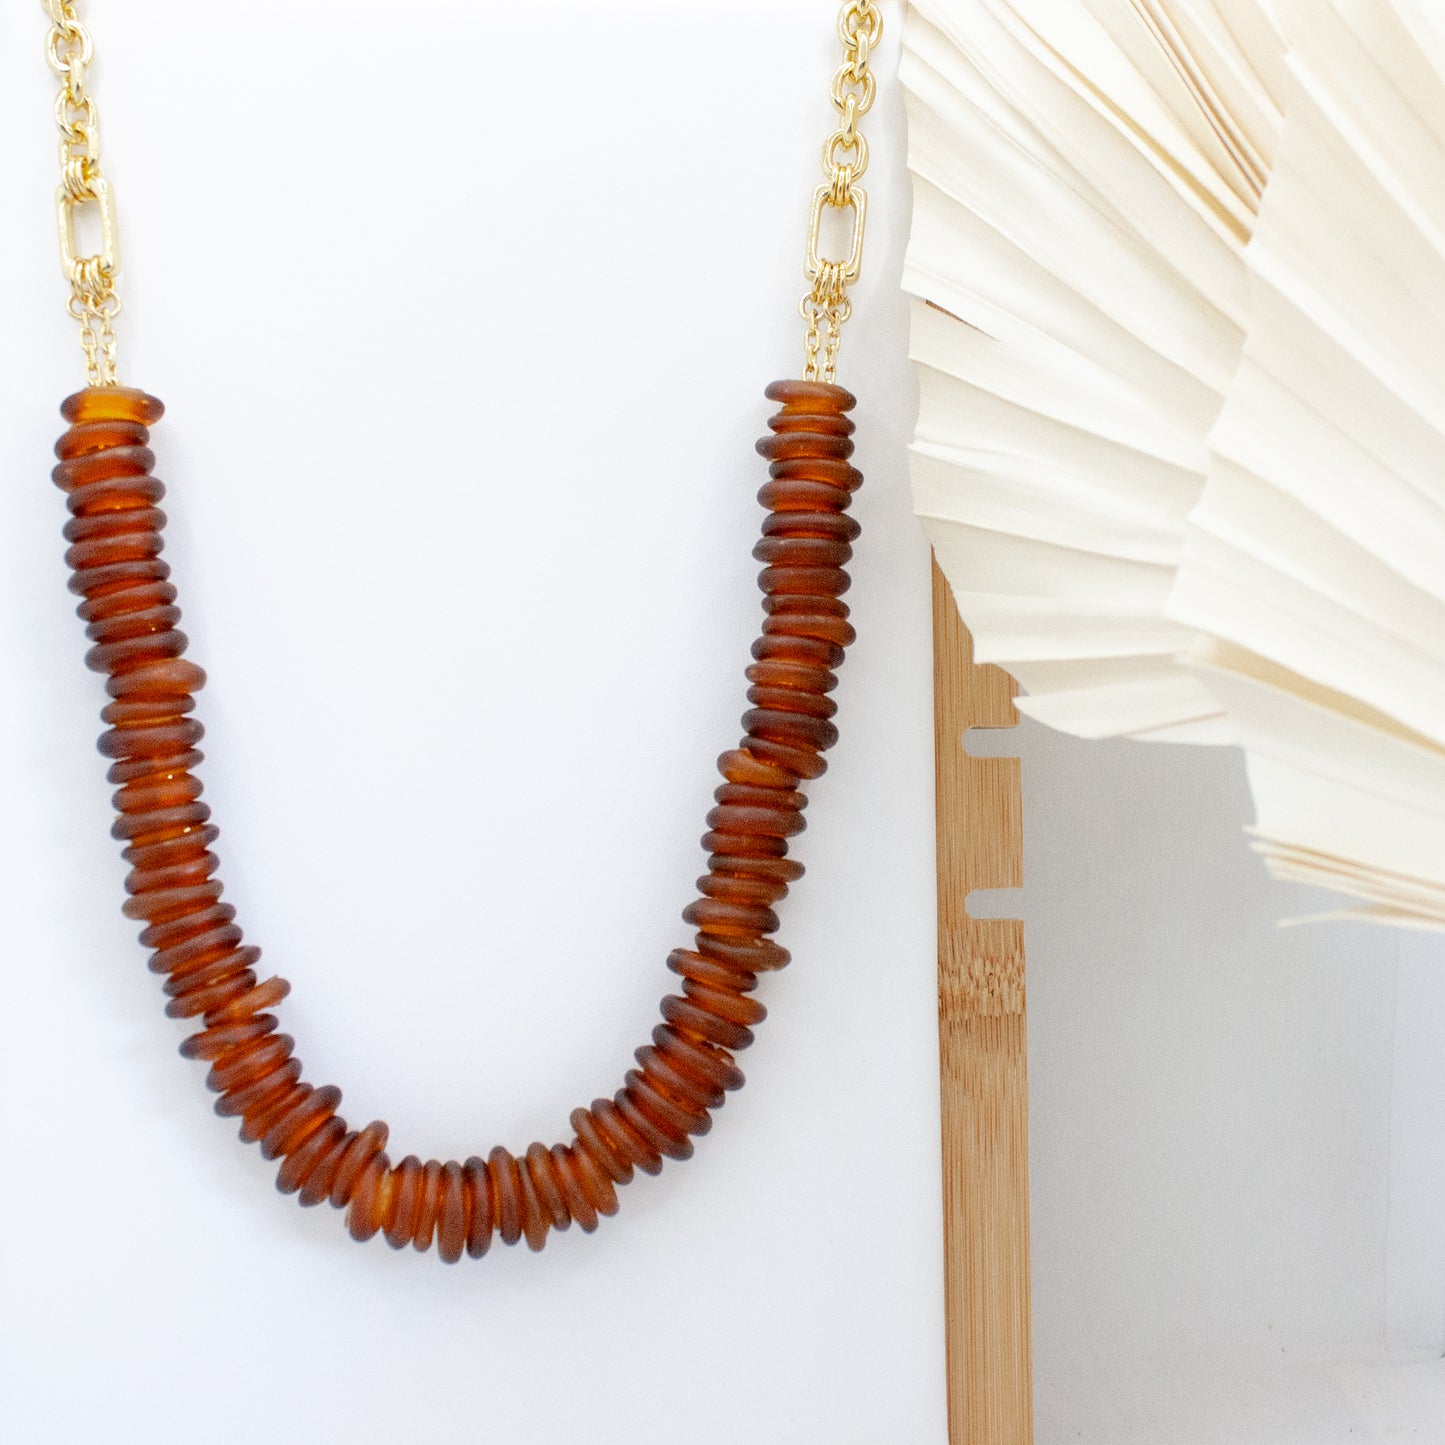 Koko Glass Bead Necklace - Amber :: 24k Gold Filled